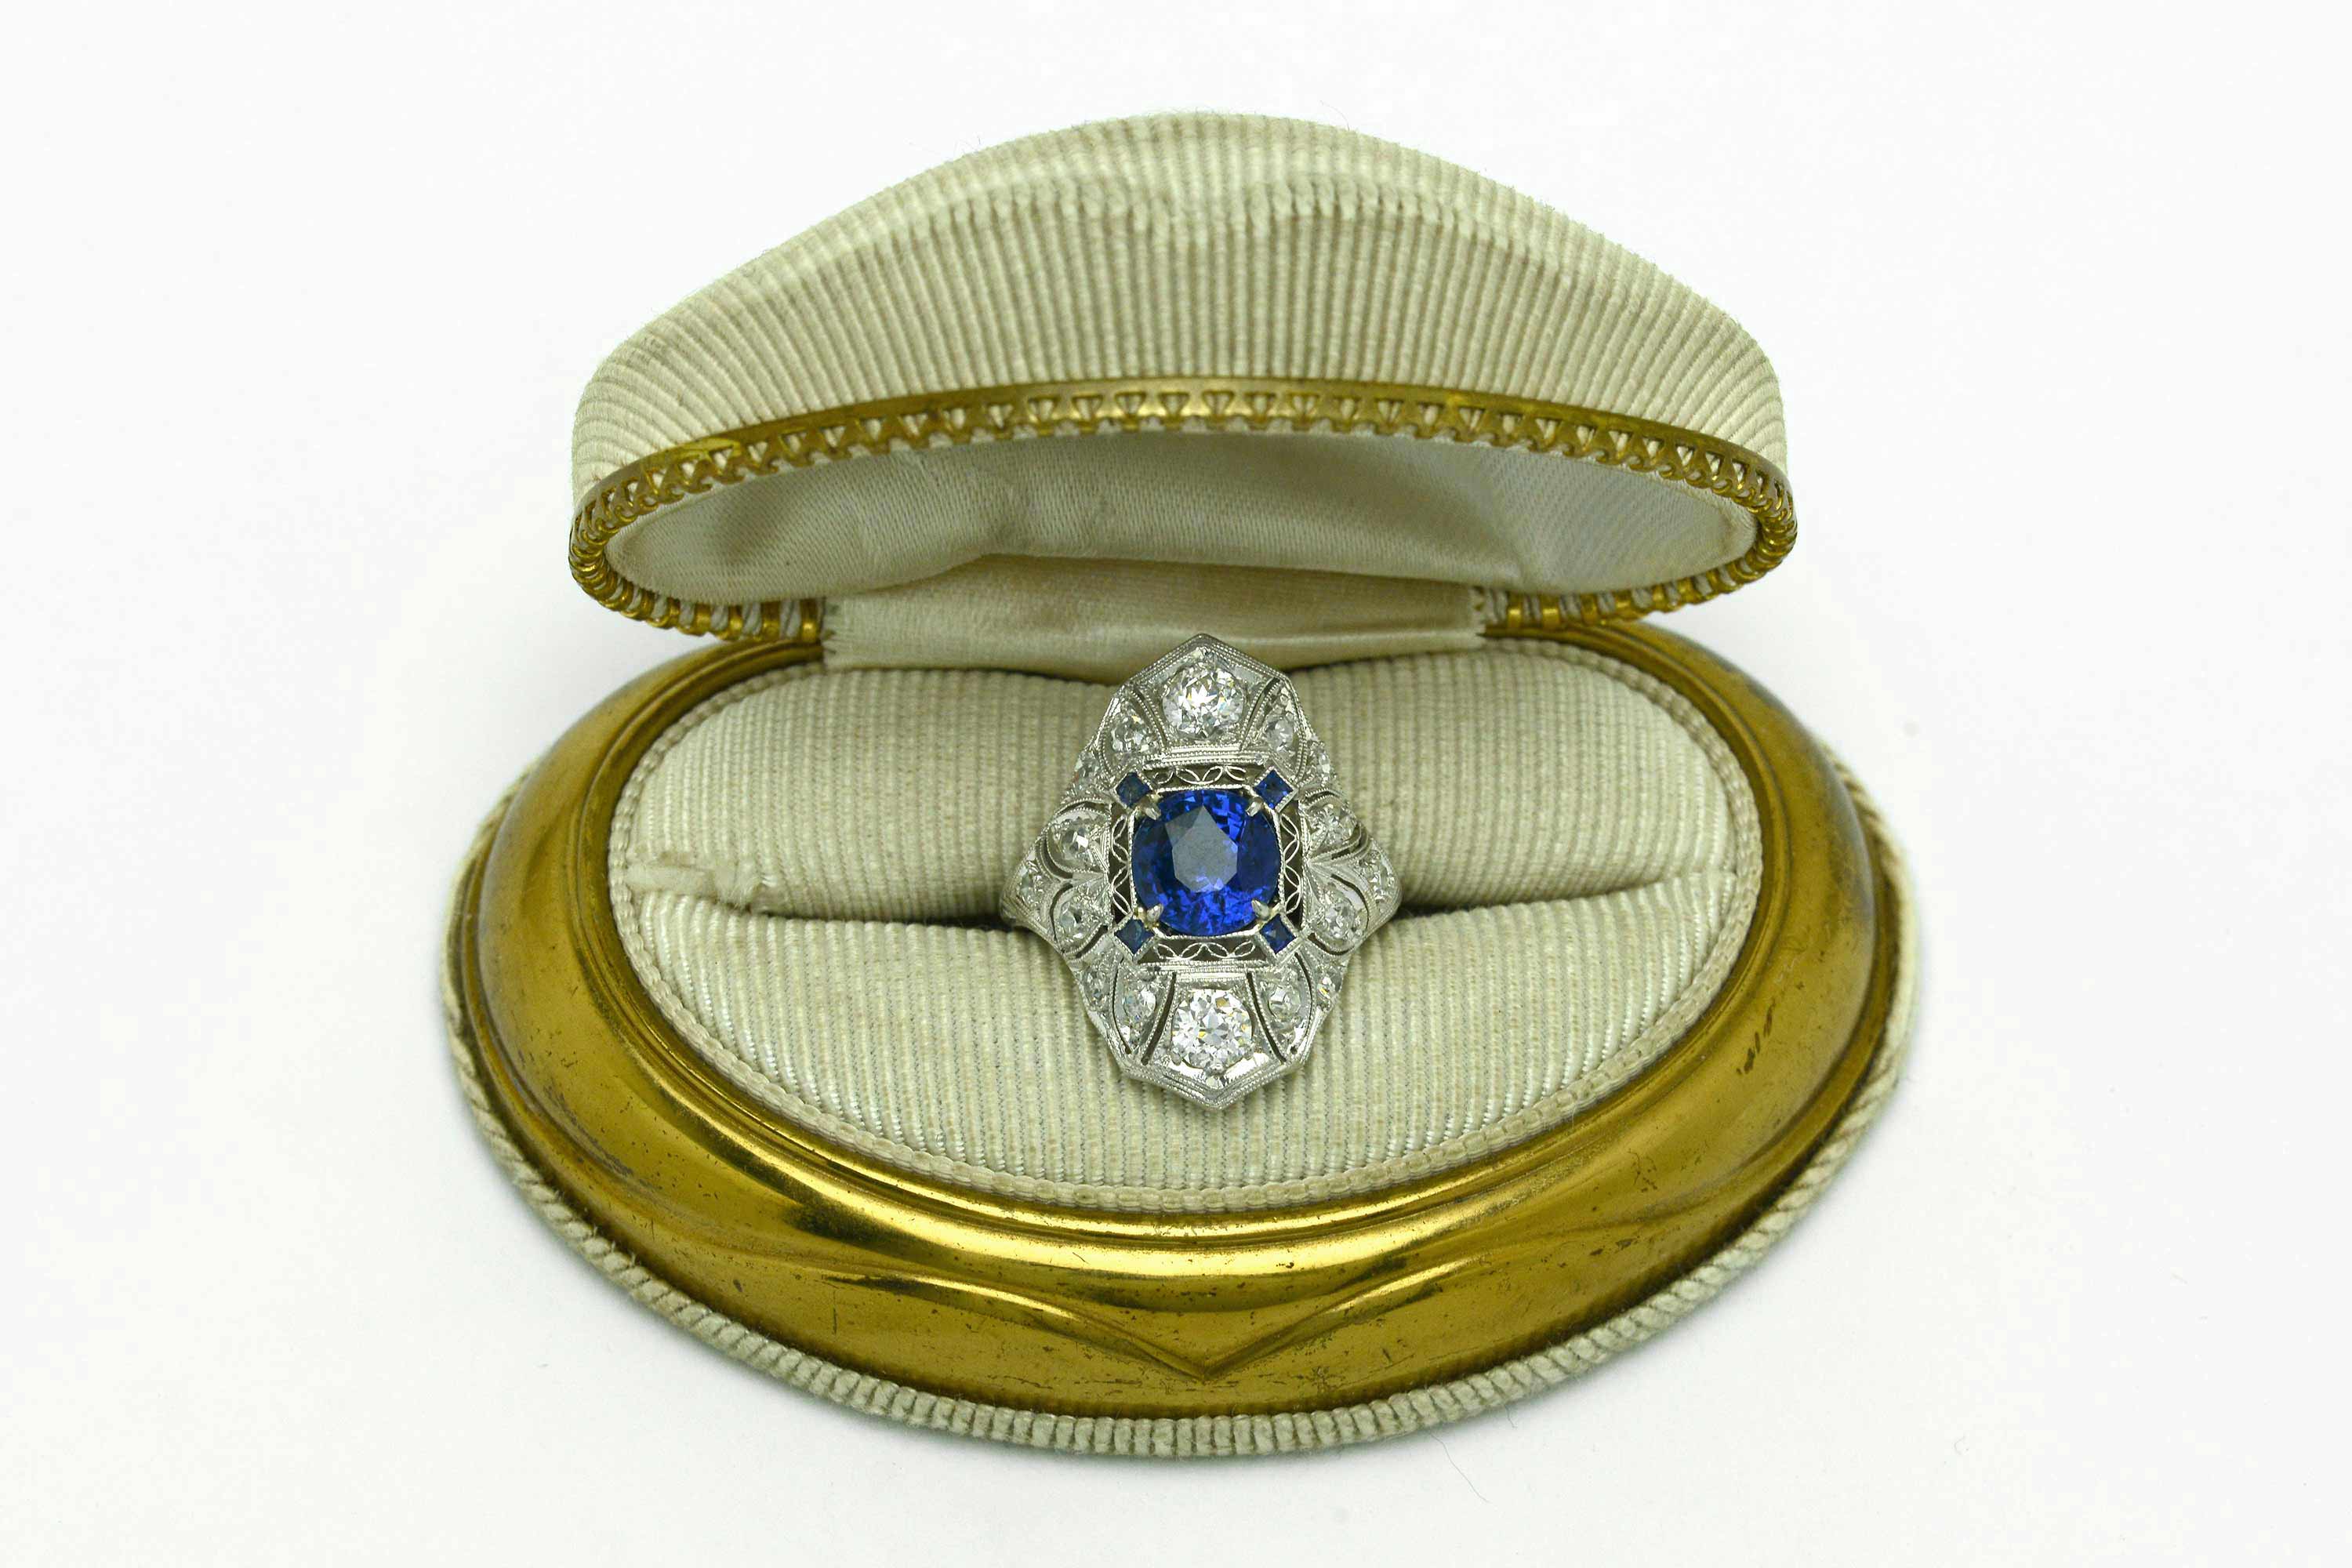 An Edwardian sapphire engagement ring from the early 1900s in a presentation box.